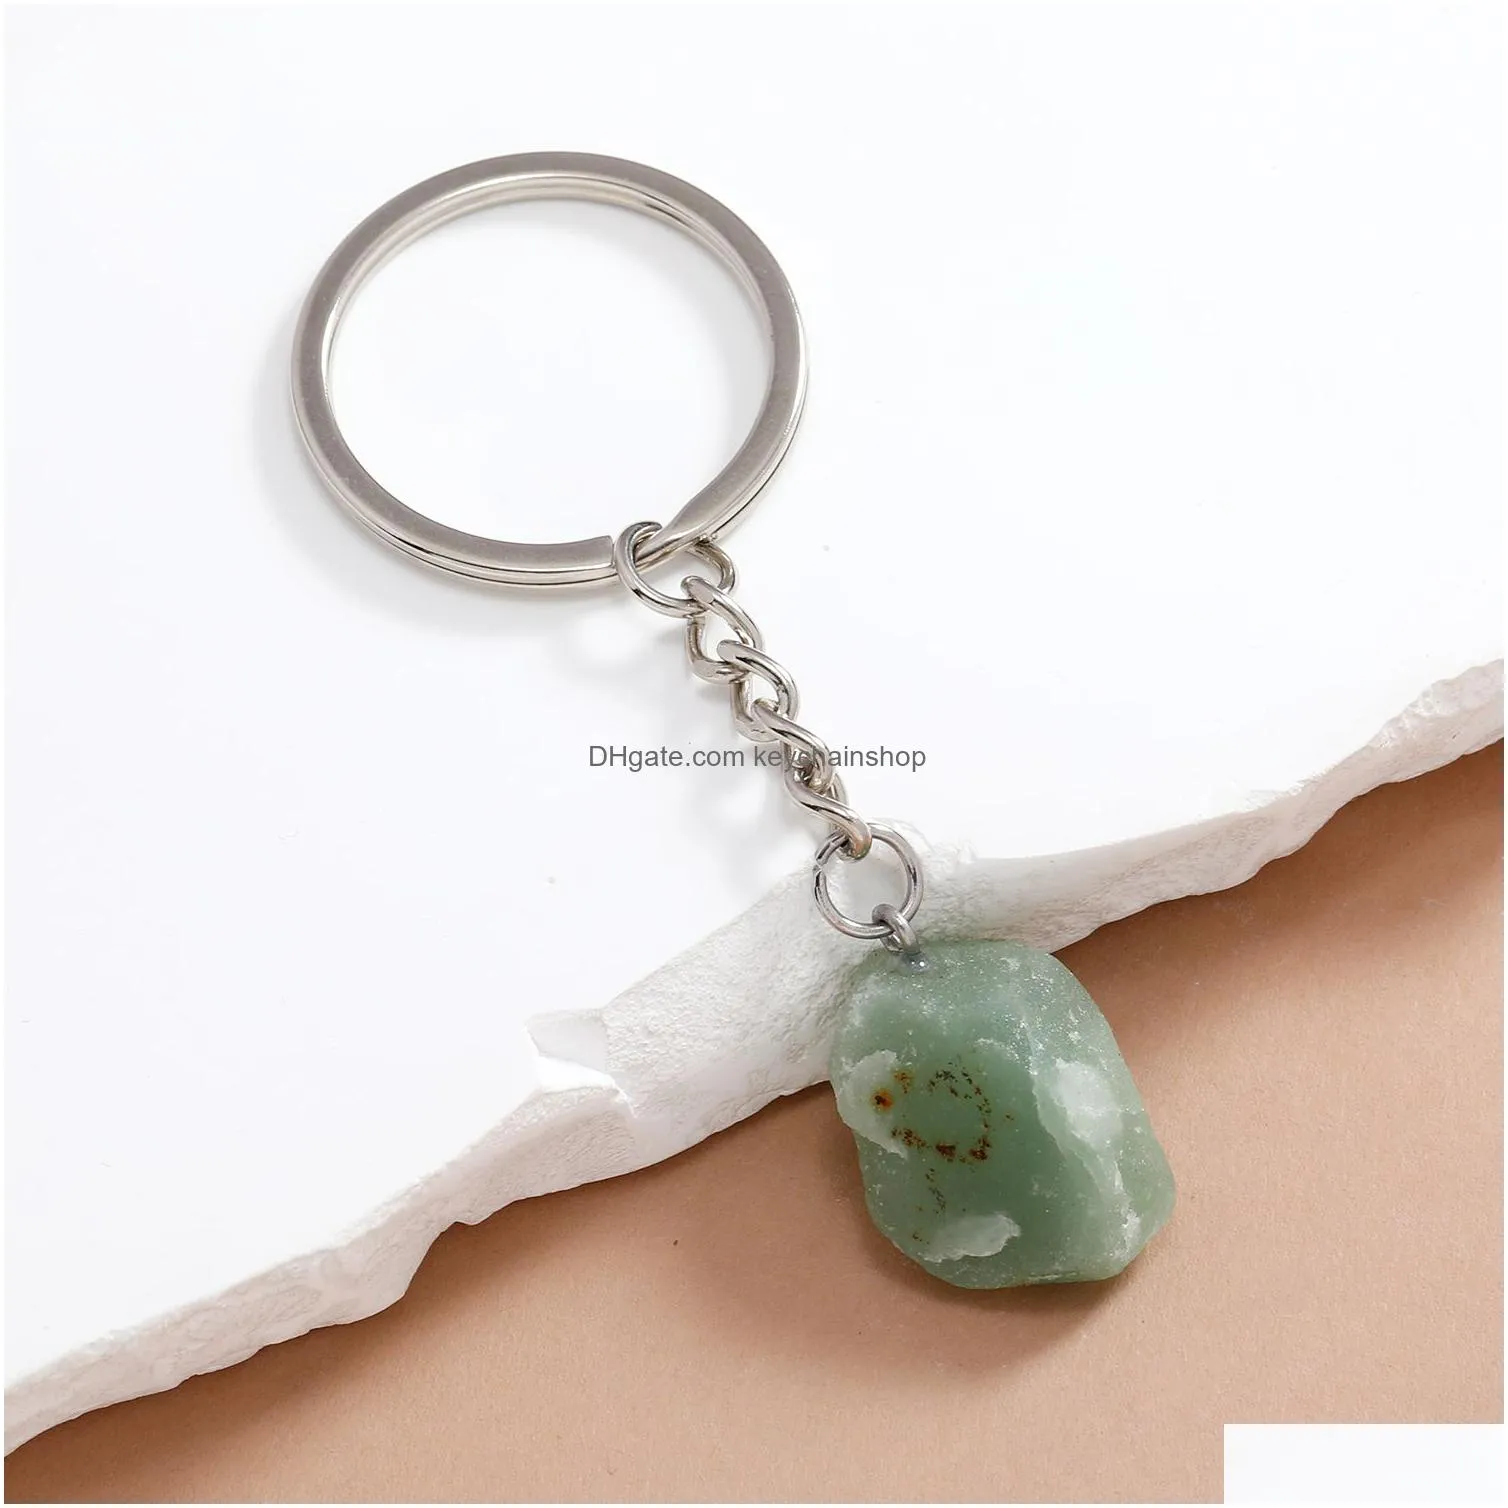 Keychains & Lanyards Irregar Ore Crystal Opal Natural Stone Key Rings Rough Gem Charms Keychains Healing Keyrings For Women Men Drop D Dhic5